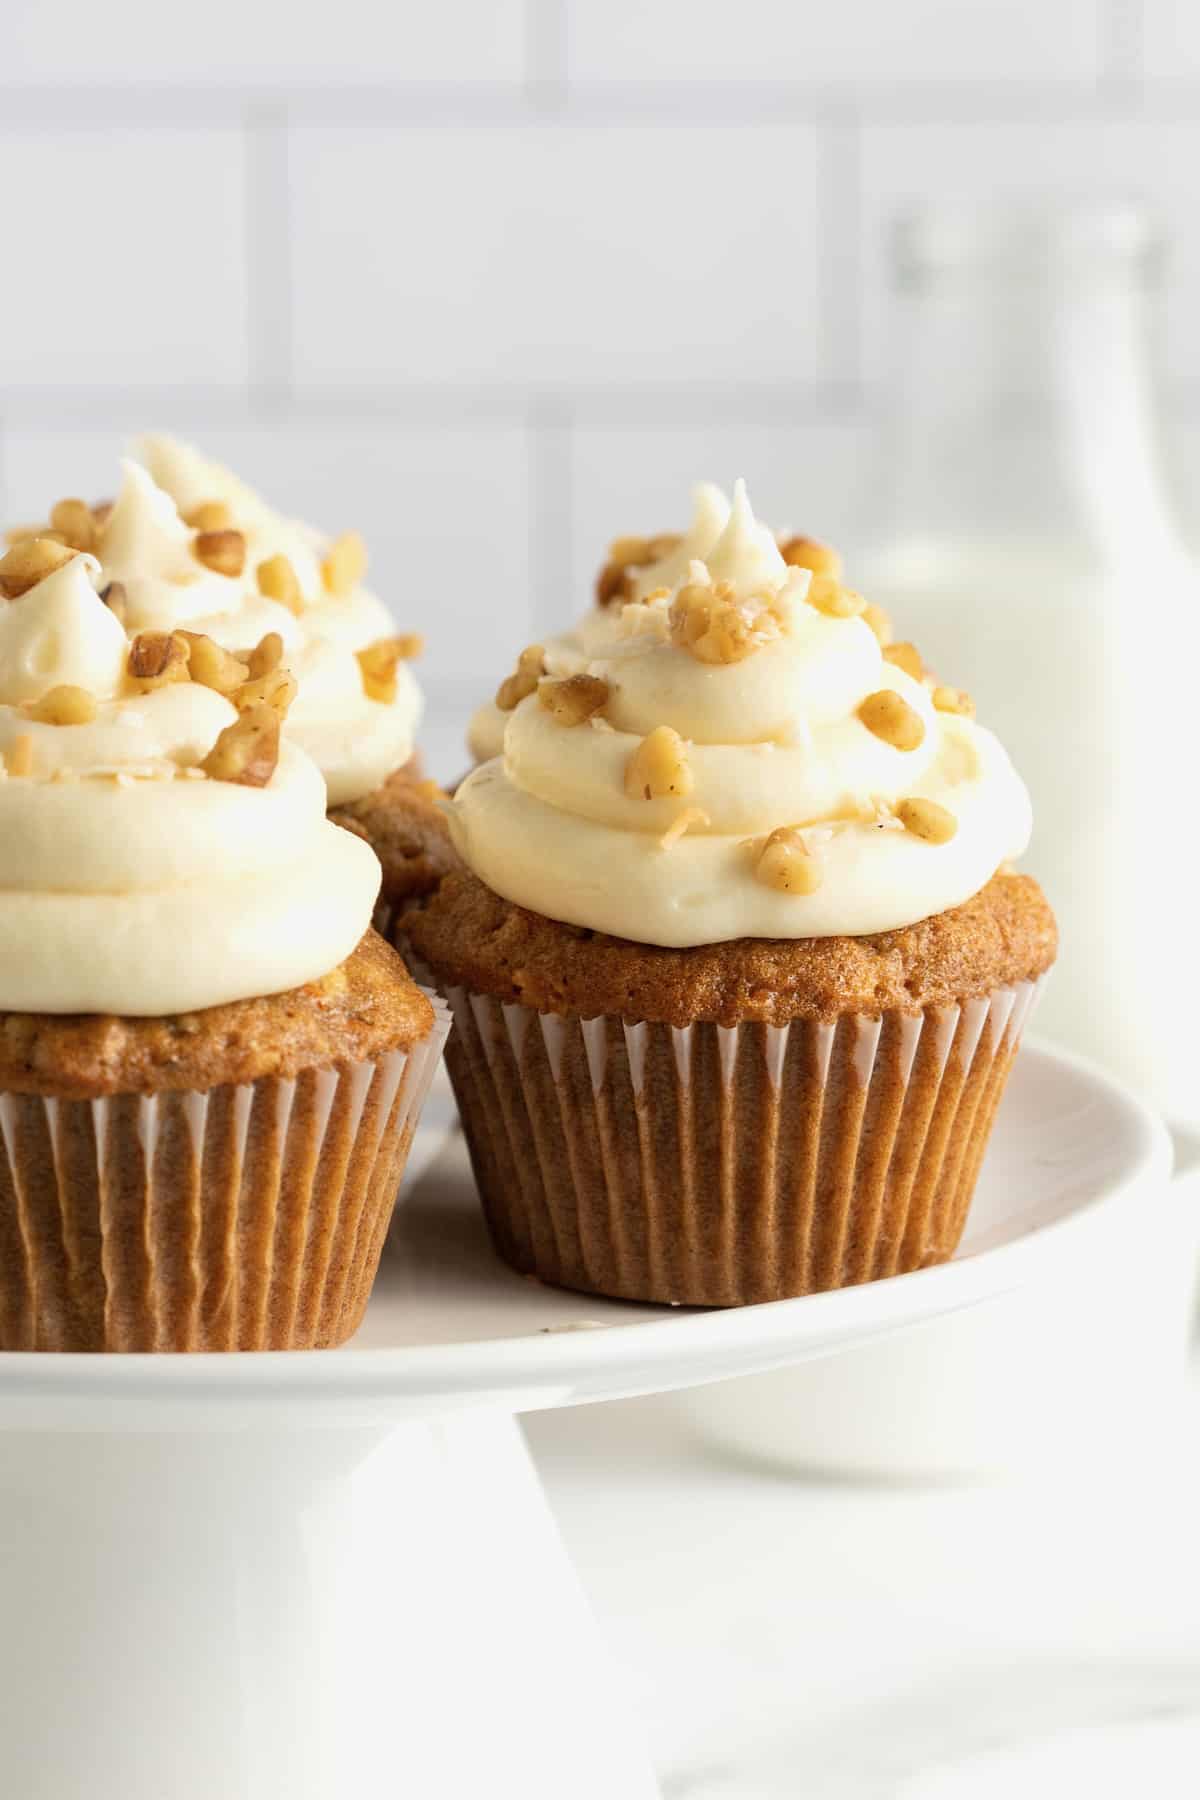 Carrot Cake Cupcakes by The BakerMama